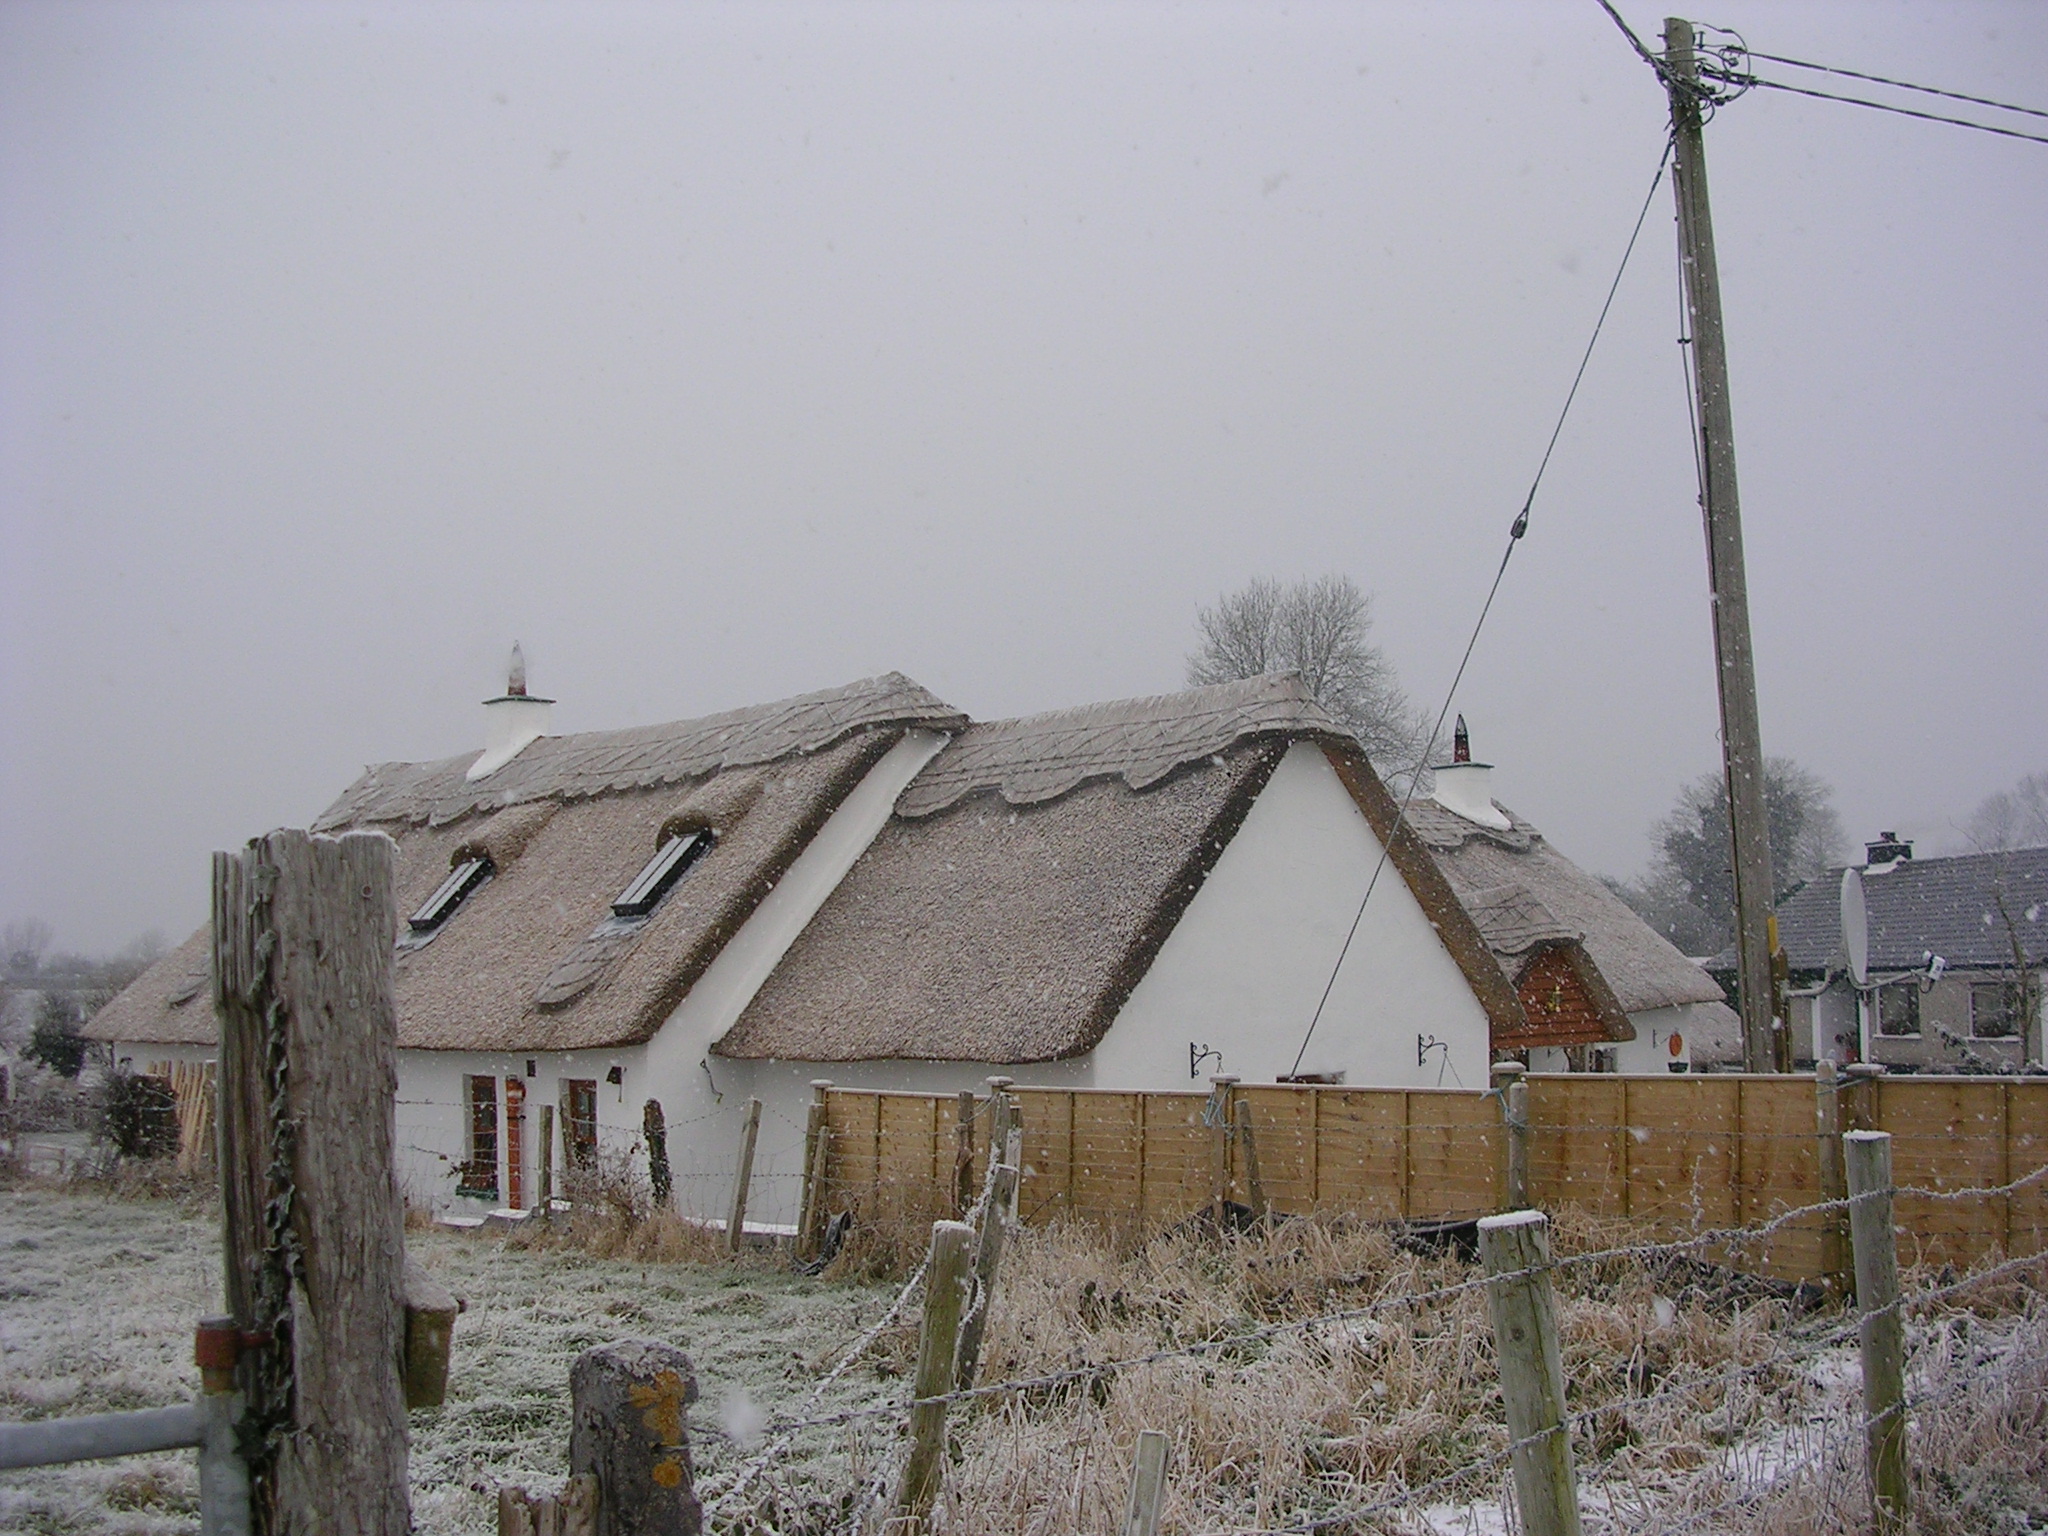 Winter Time under a thatch roof - Ireland